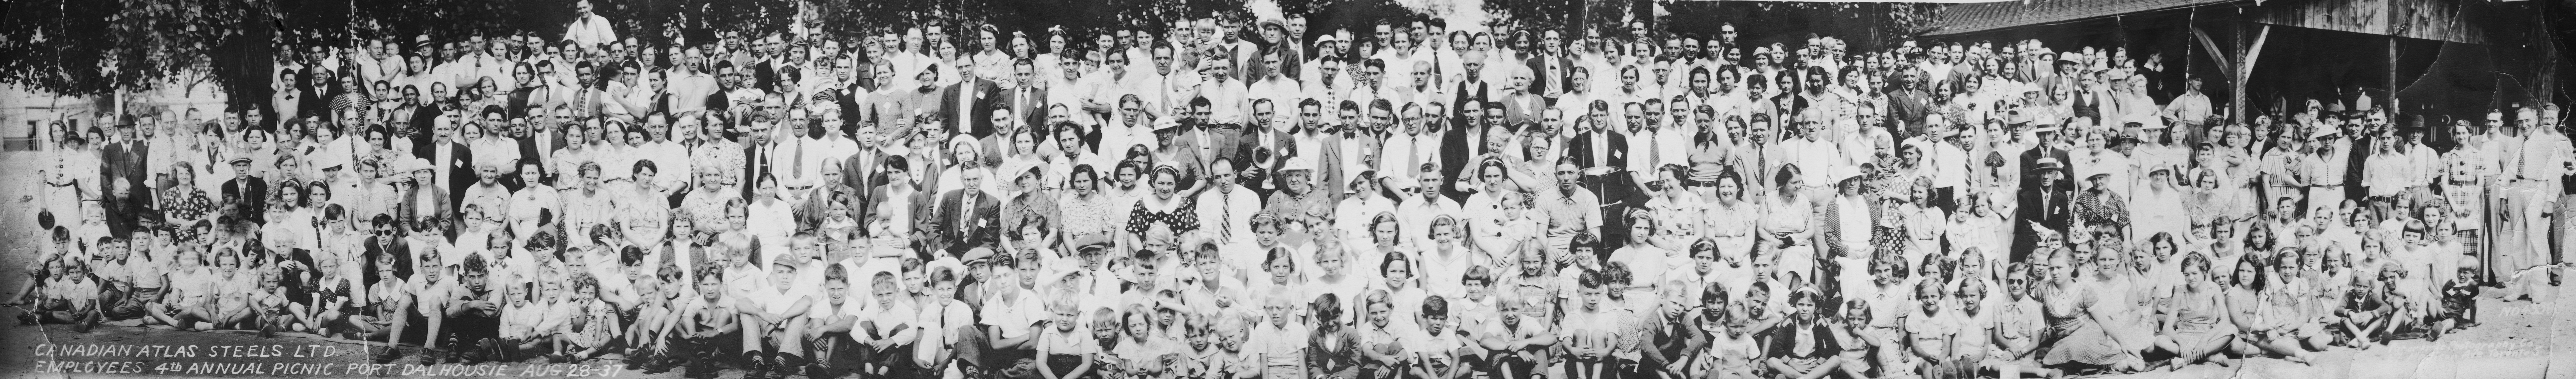 Canadian Atlas Steels Ltd. Employees 4th Annual Picnic - Aug 28, 1937